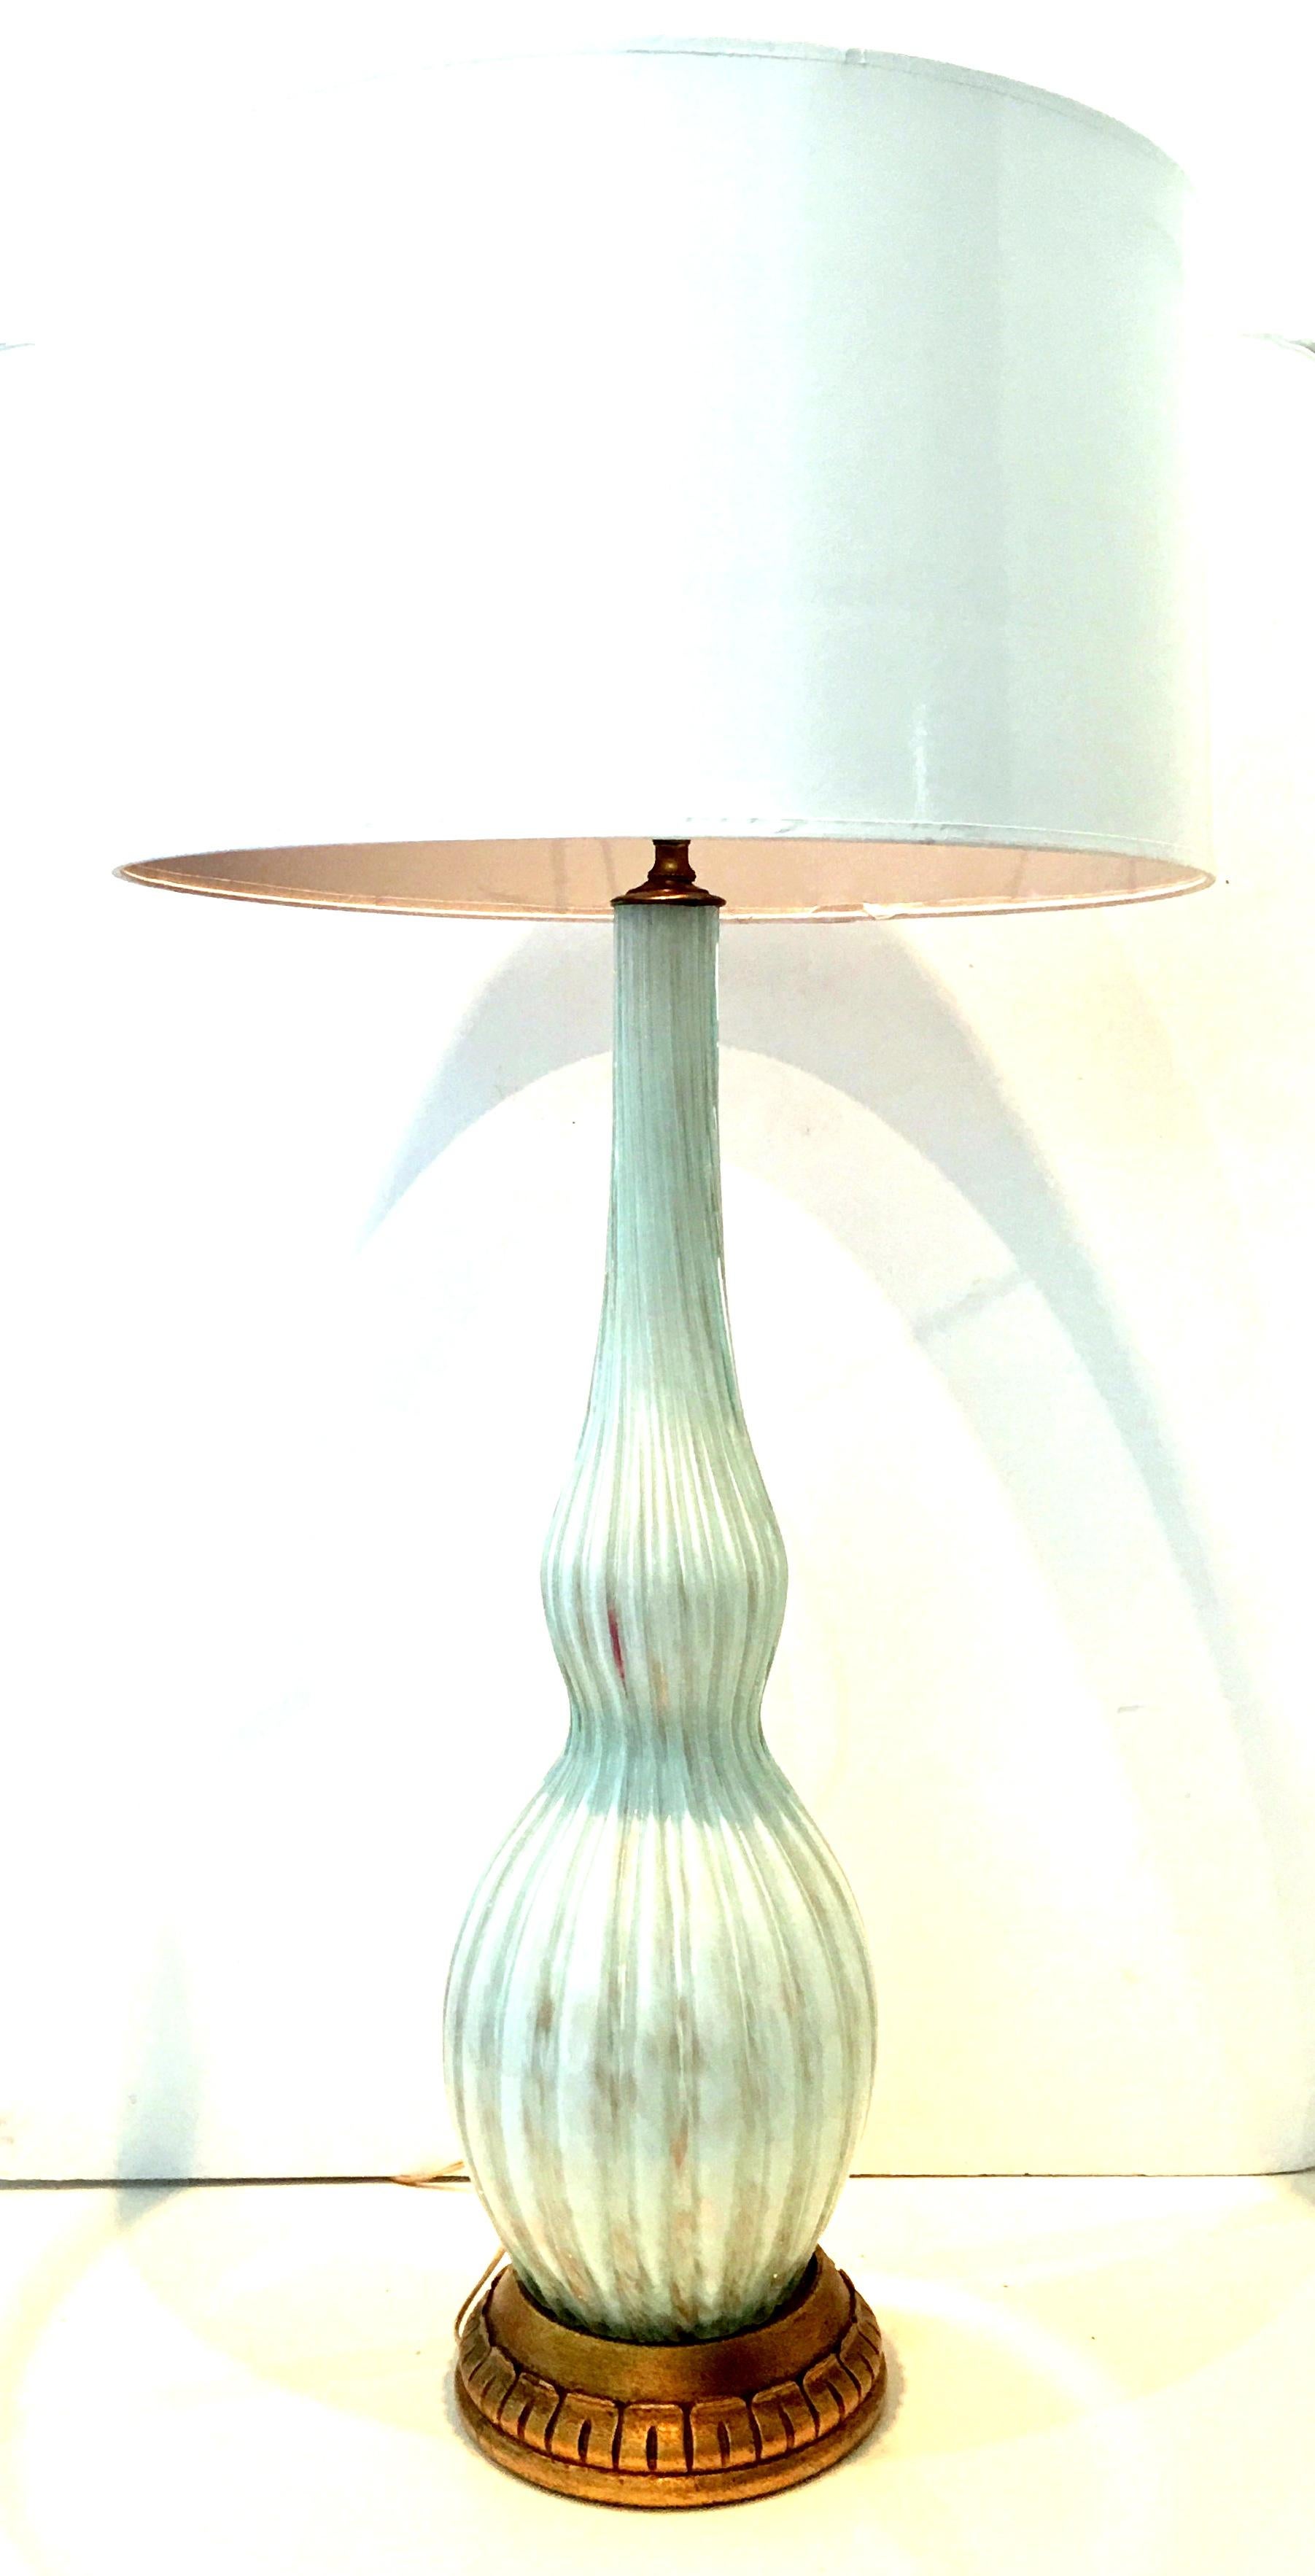 1950s Italian Marbro style Murano glass aquamarine lamp with metallic gold/copper inclusion and gilt wood base. Features original brass fittings. Includes brass harp and round brass finial. Height to socket, 31